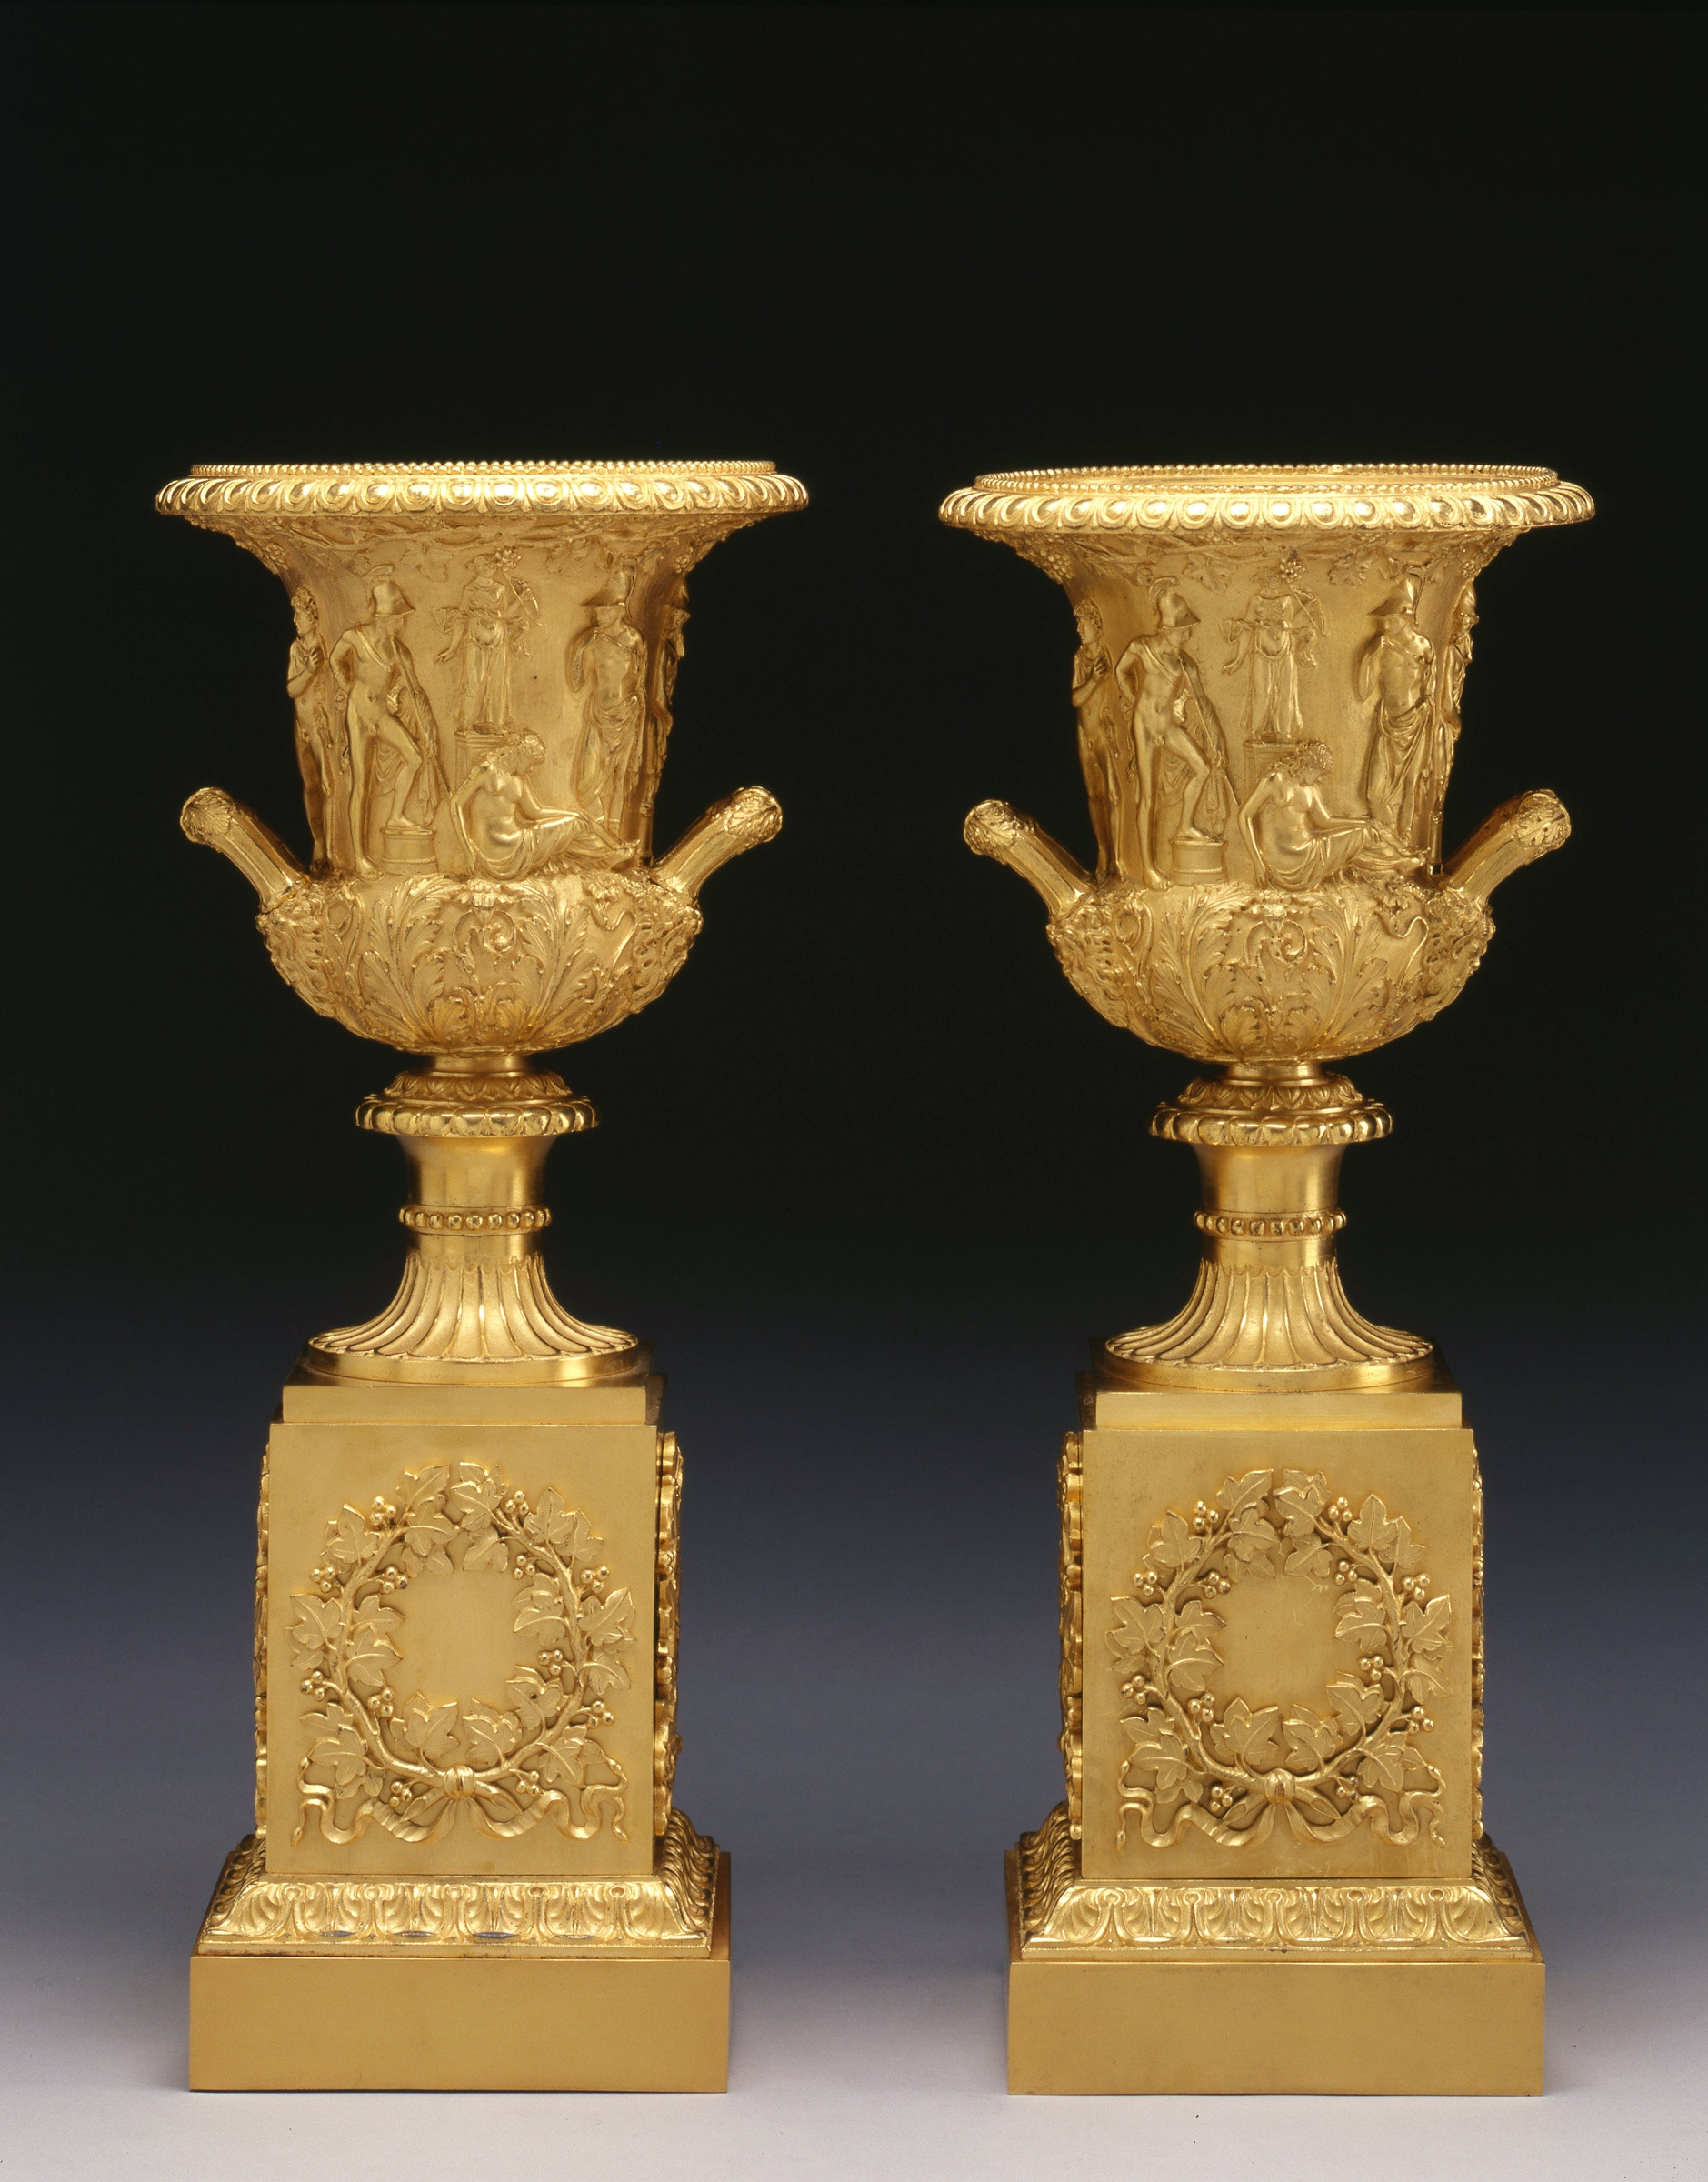 23 Recommended 3d Printed Vase 2024 free download 3d printed vase of pierre philippe thomire attributed to a pair of empire medici within a pair of empire medici vases on pedestals attributed to pierre philippe thomire